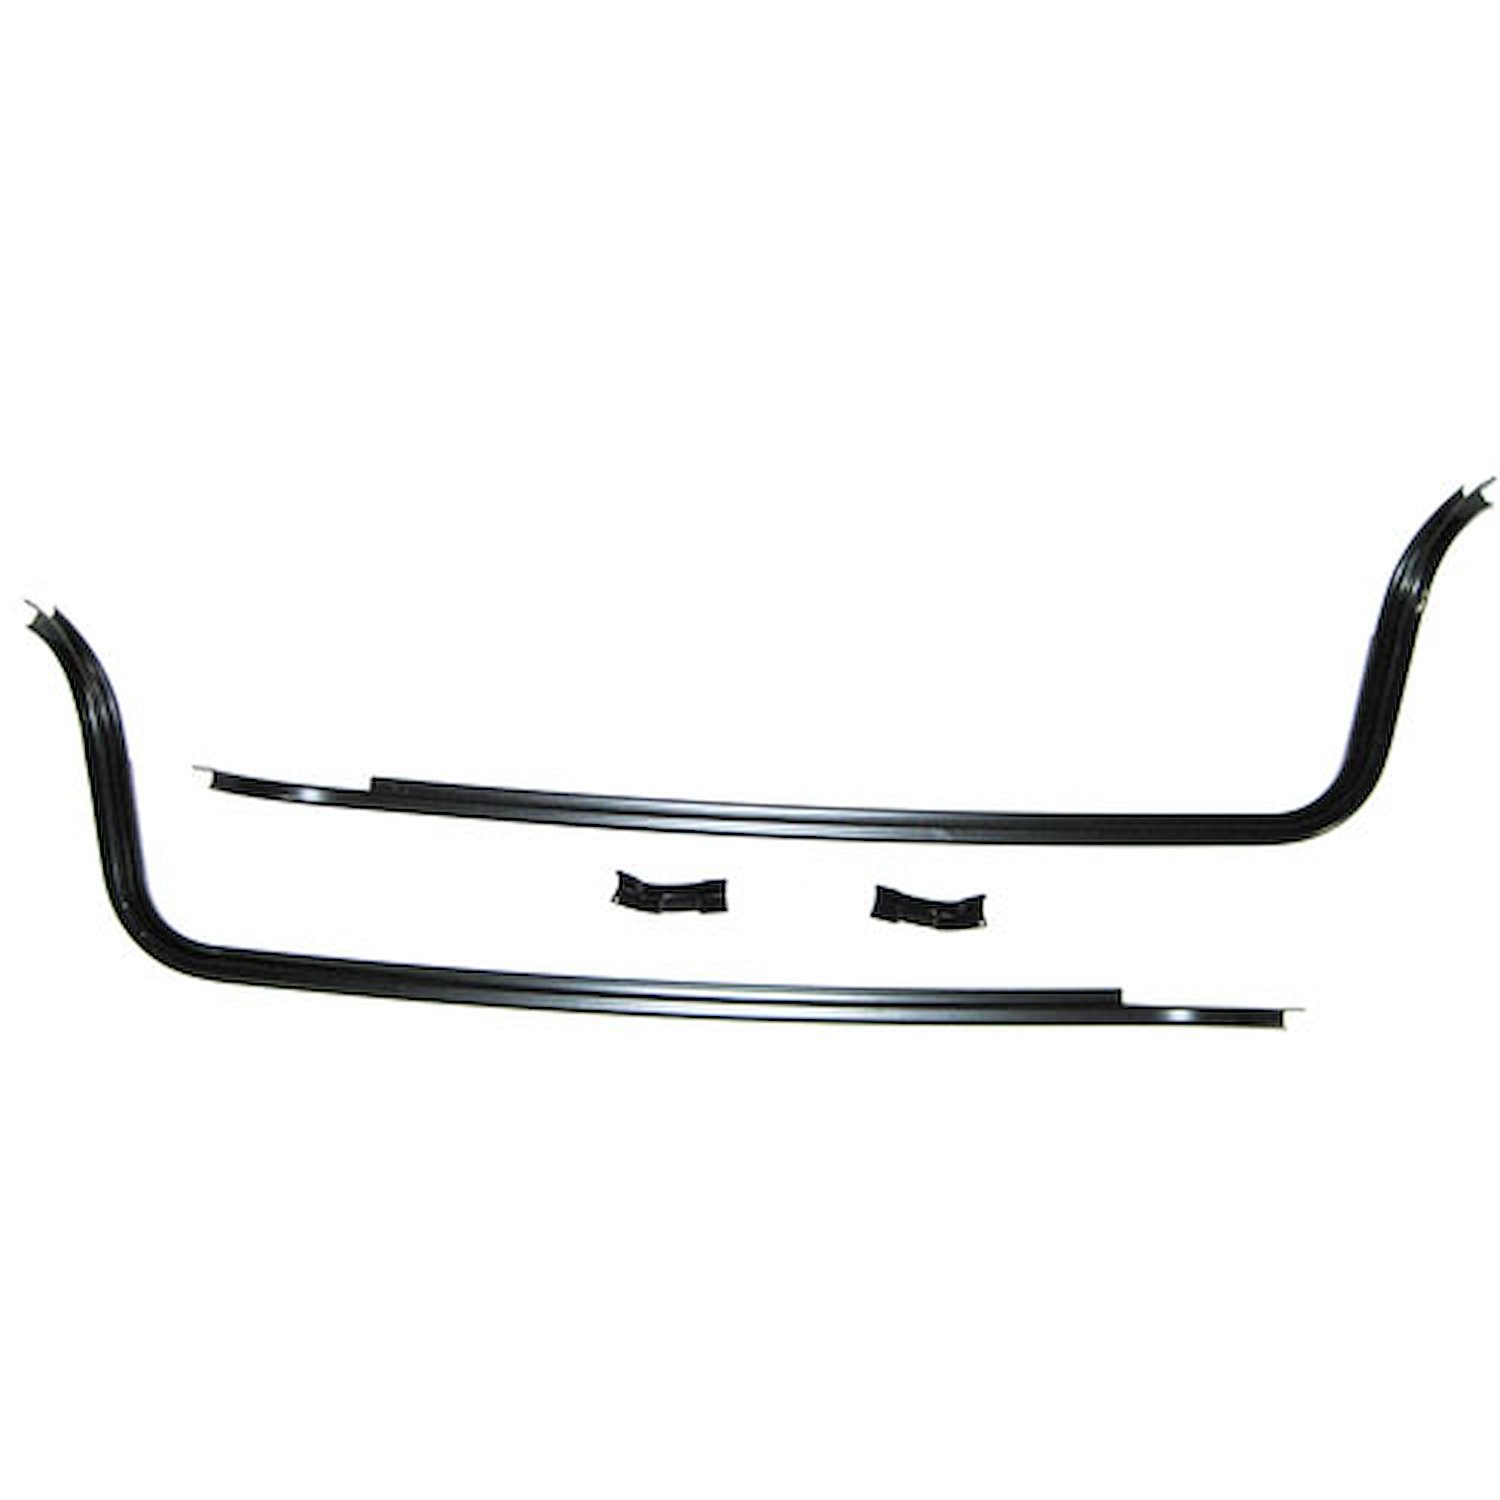 TL13-621S Trunk Weather Strip Gutter Set 1962 Chevy Impala